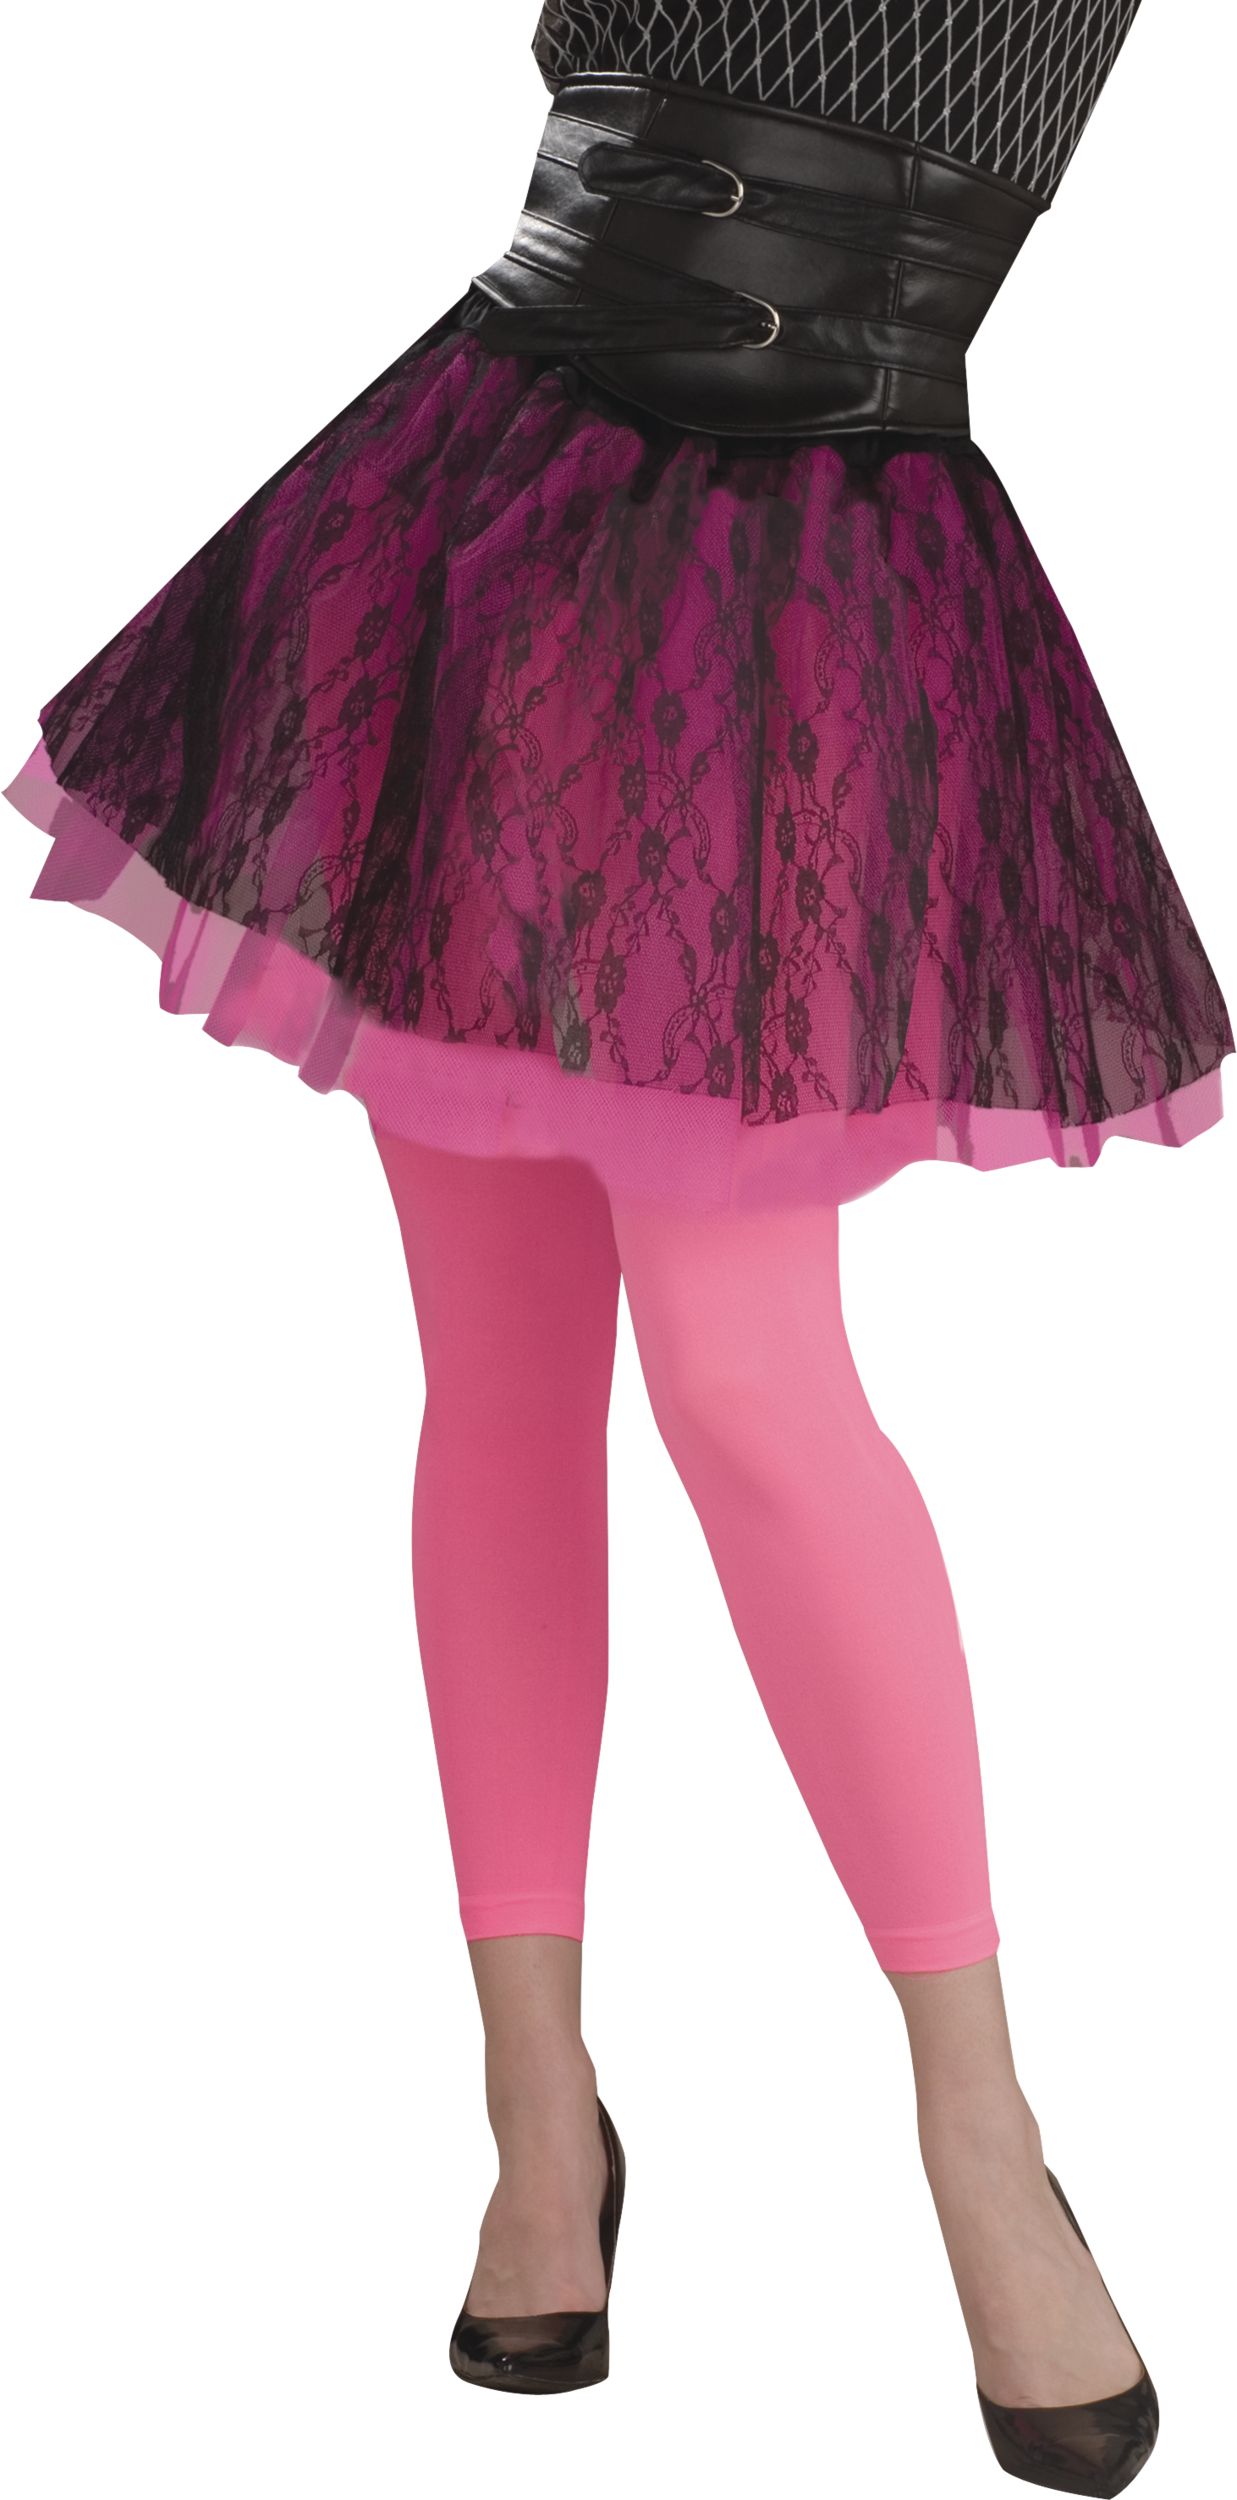 Adult 80s Hot Pink Lace Leggings - Candy Apple Costumes